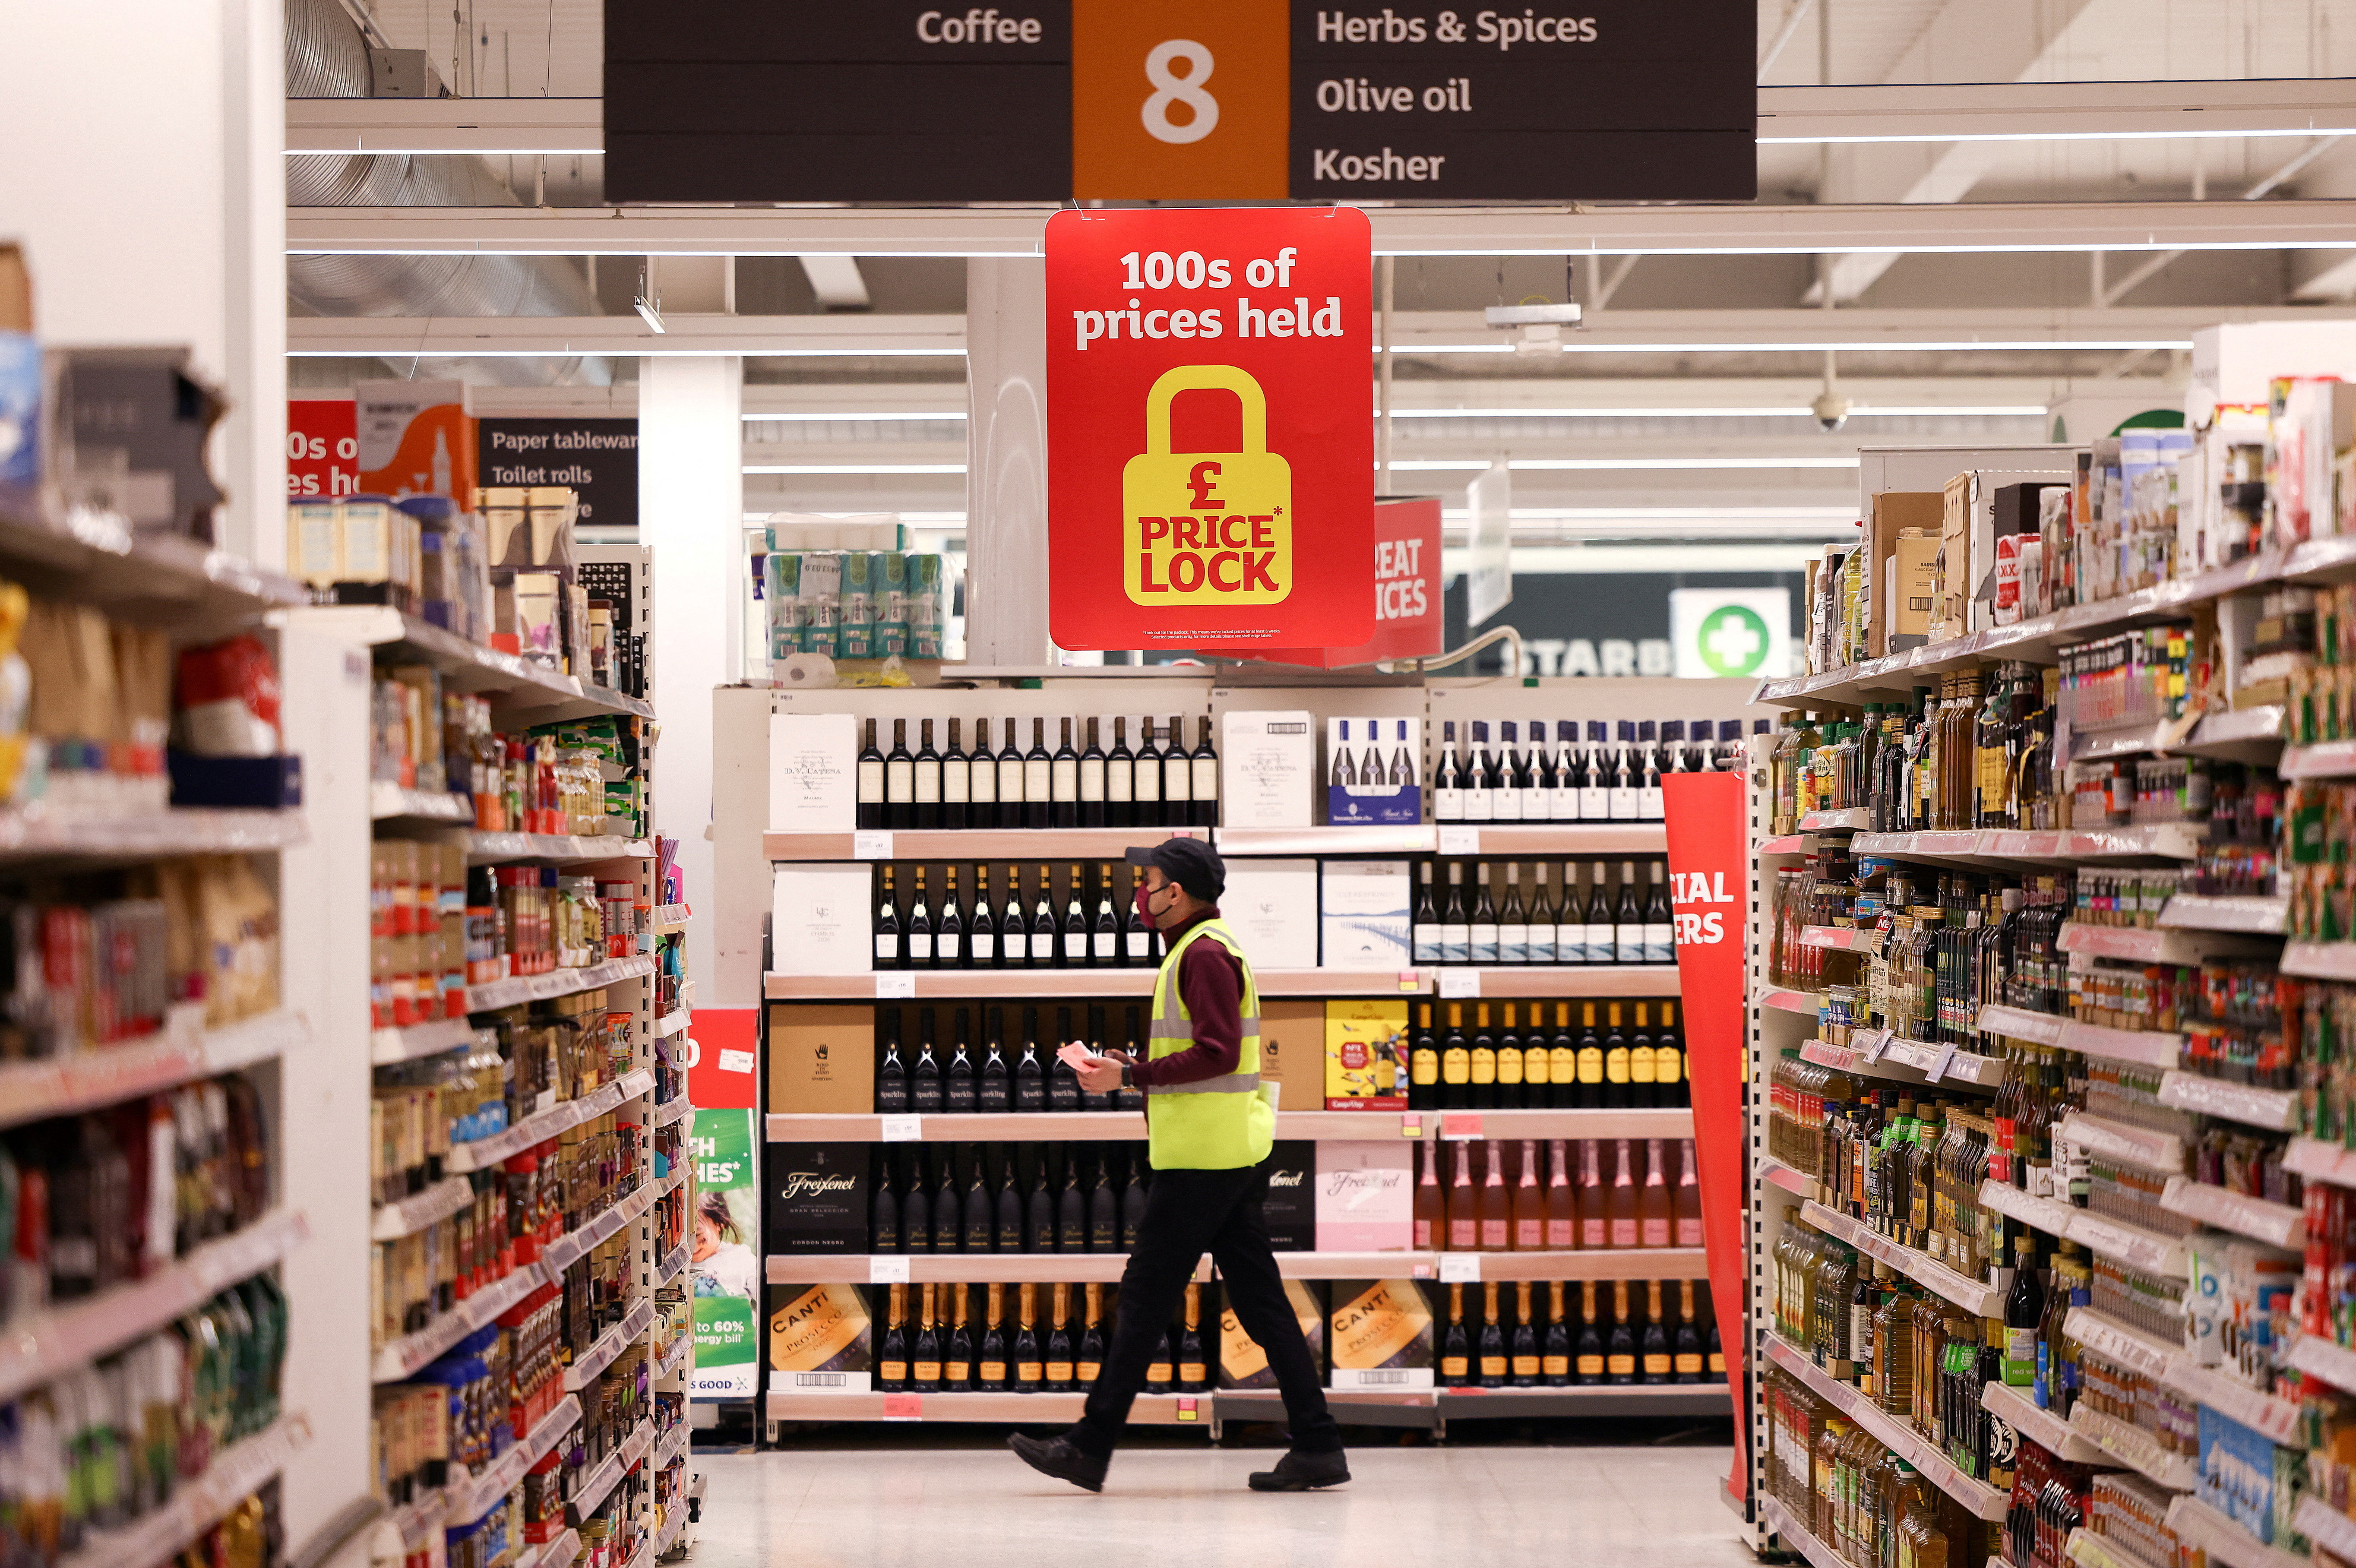 Store gallery: How Asda is making a play for the convenience sector, Gallery